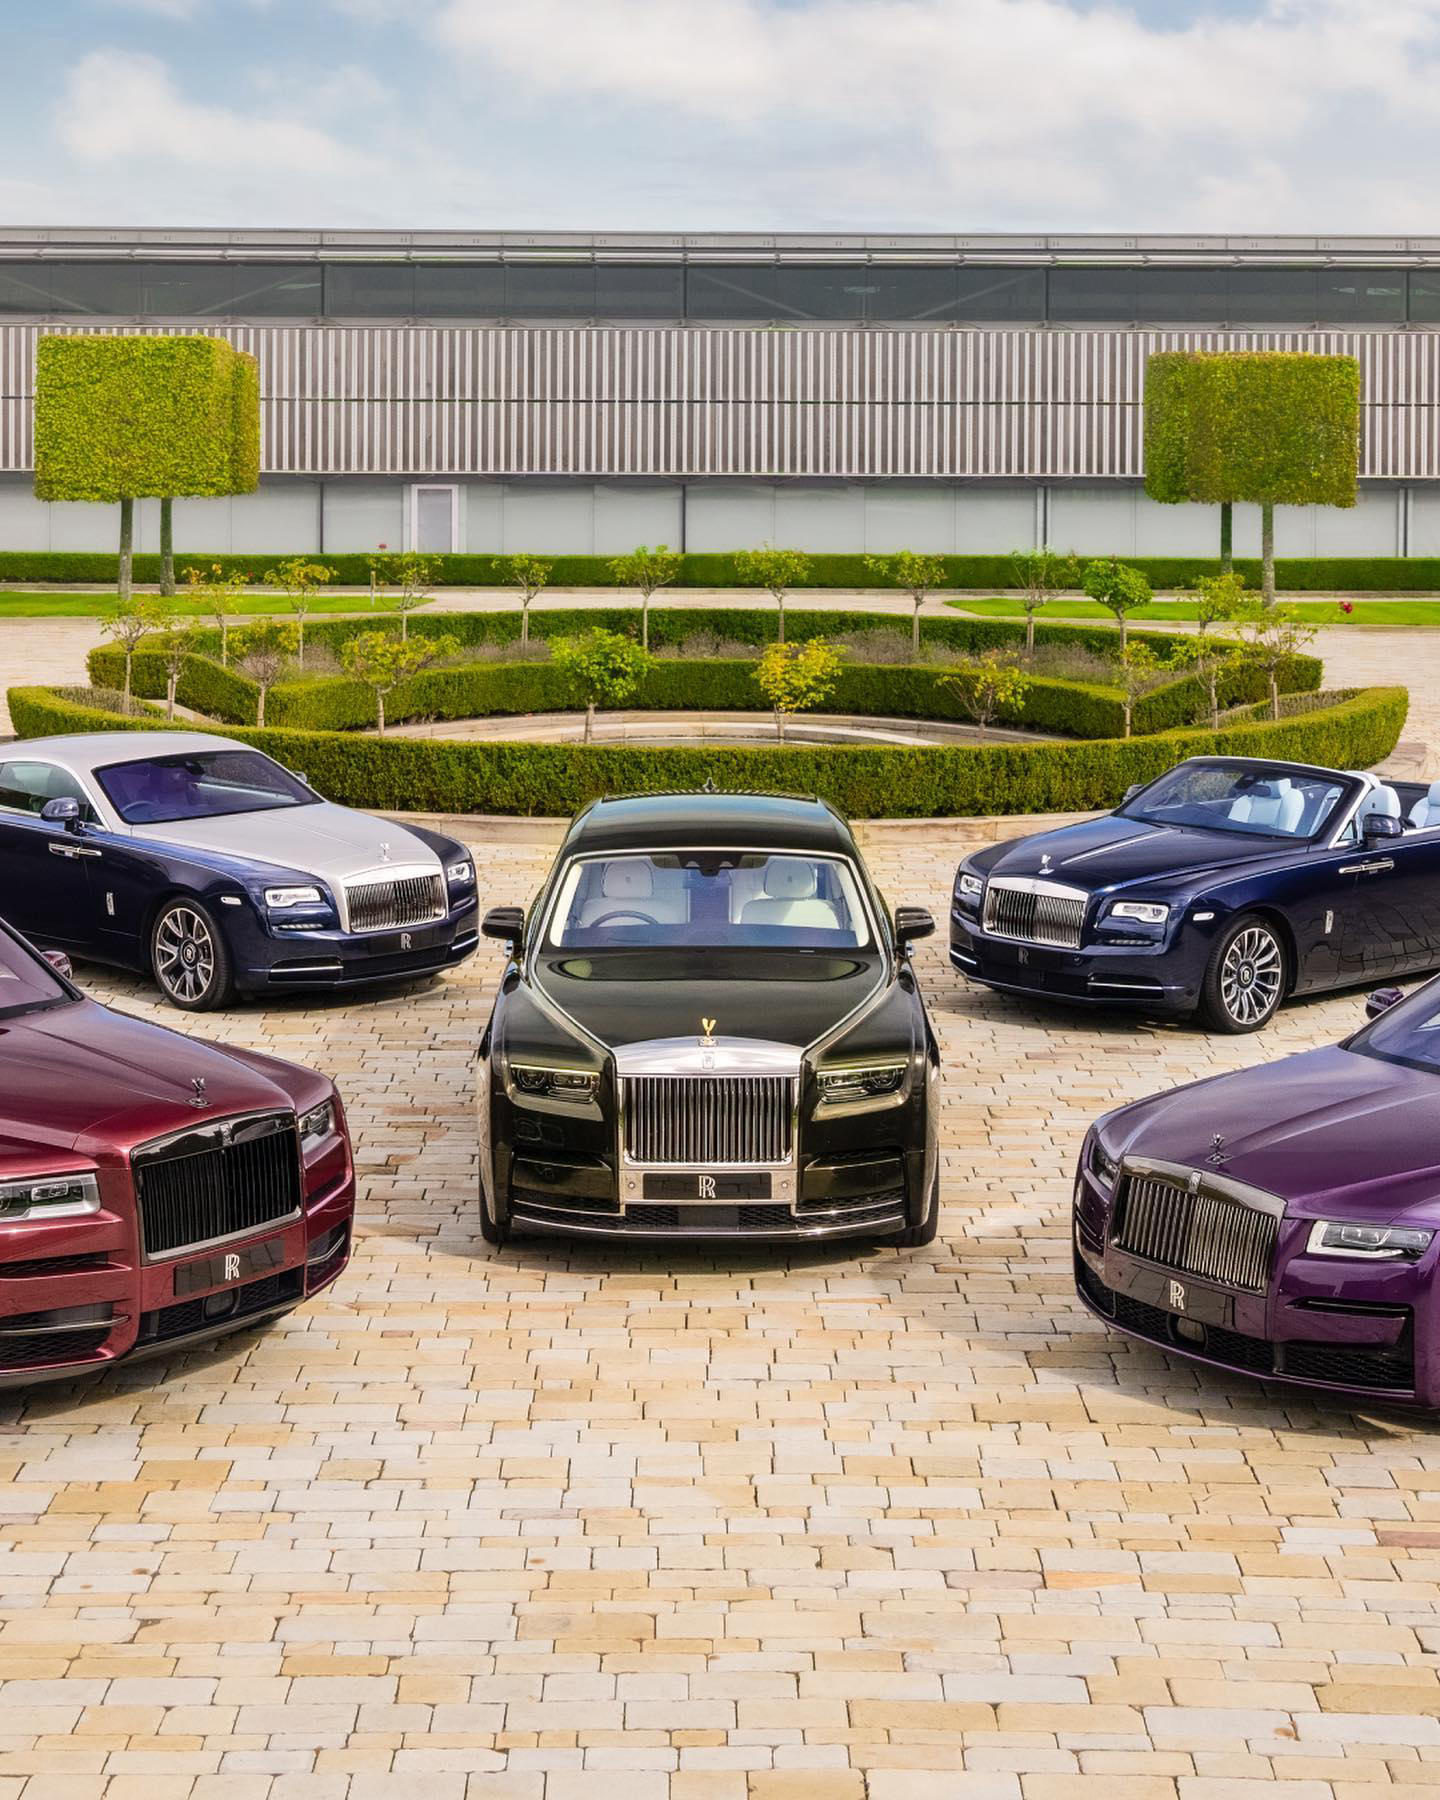 image  1 This month marks our 20th year of production at the Home of Rolls-Royce at Goodwood, the only place